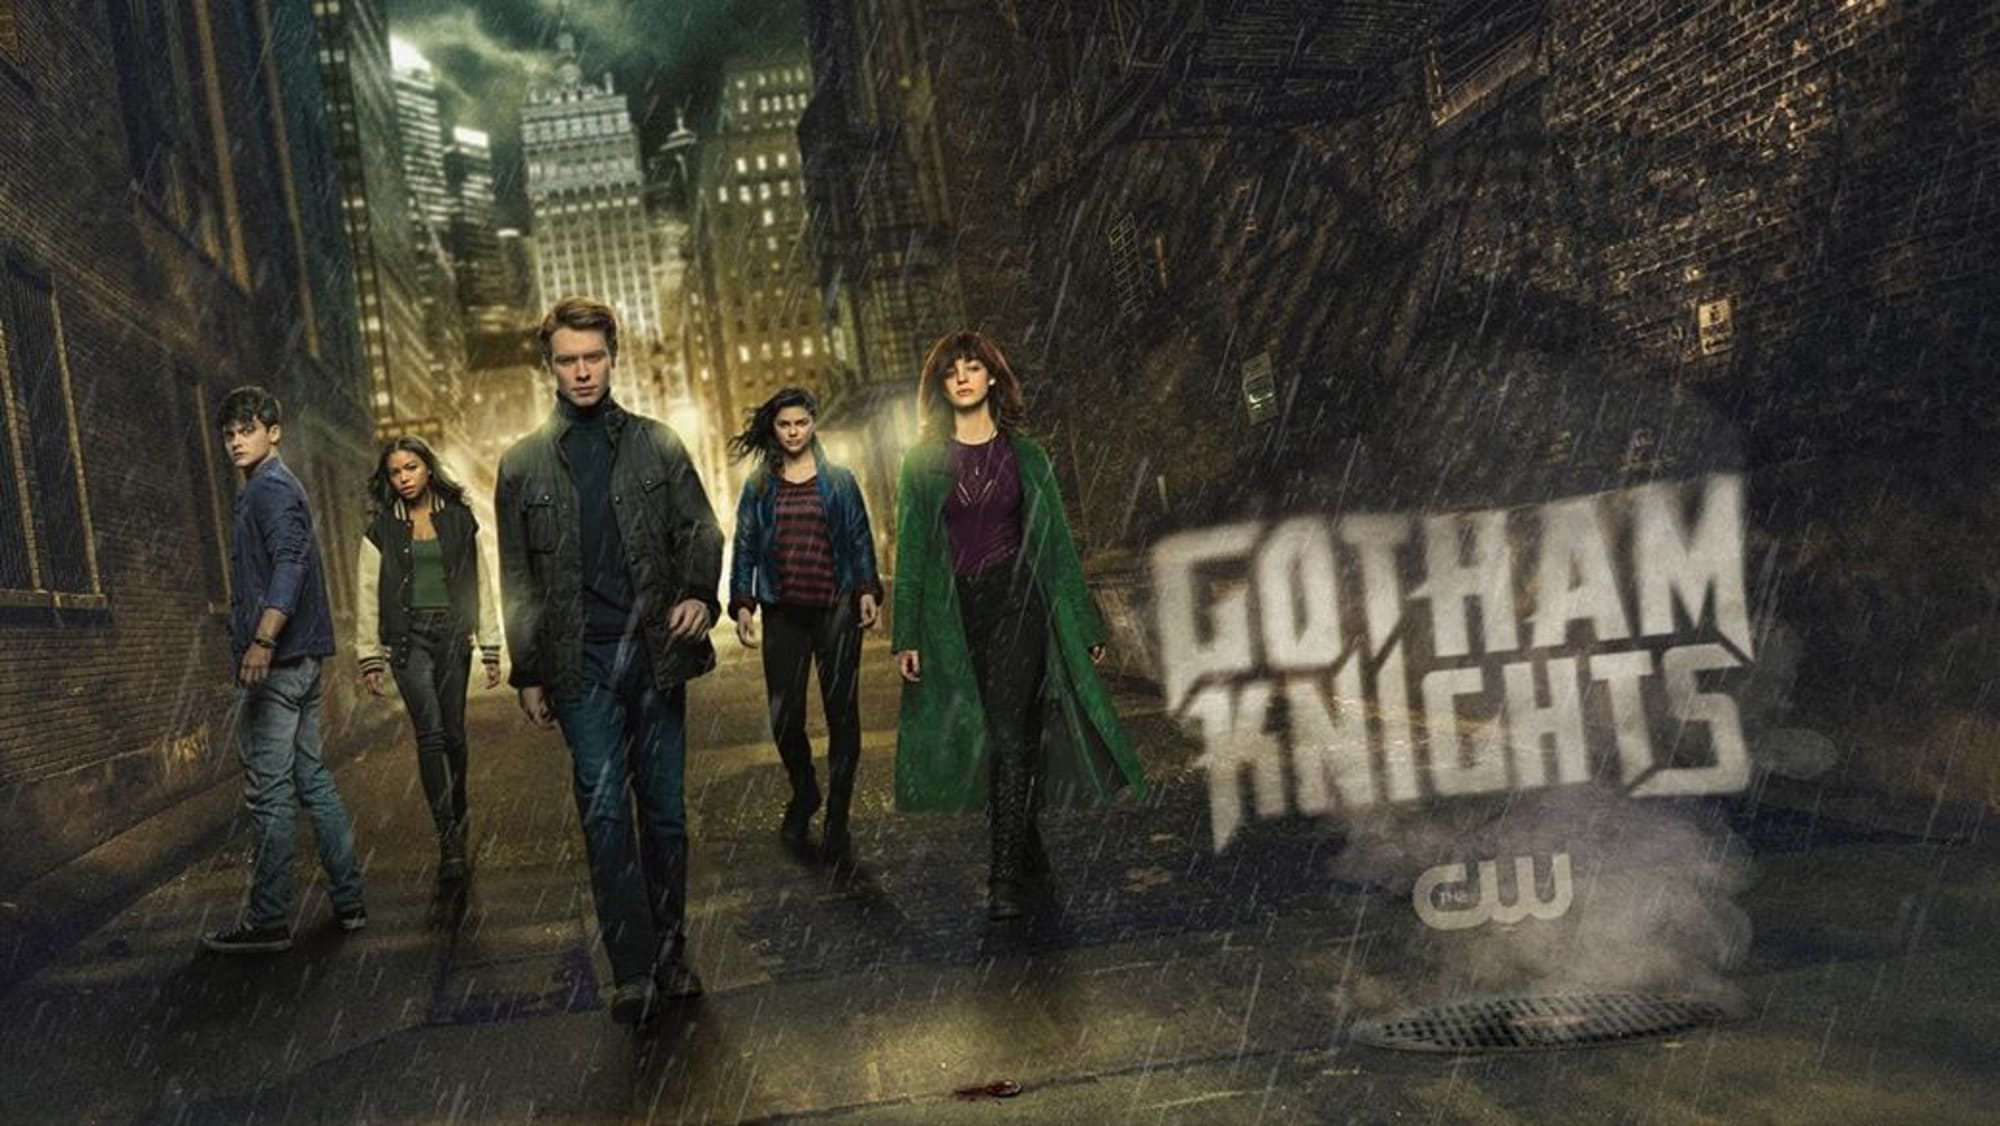 Gotham Knights release updates, cast, synopsis, and more